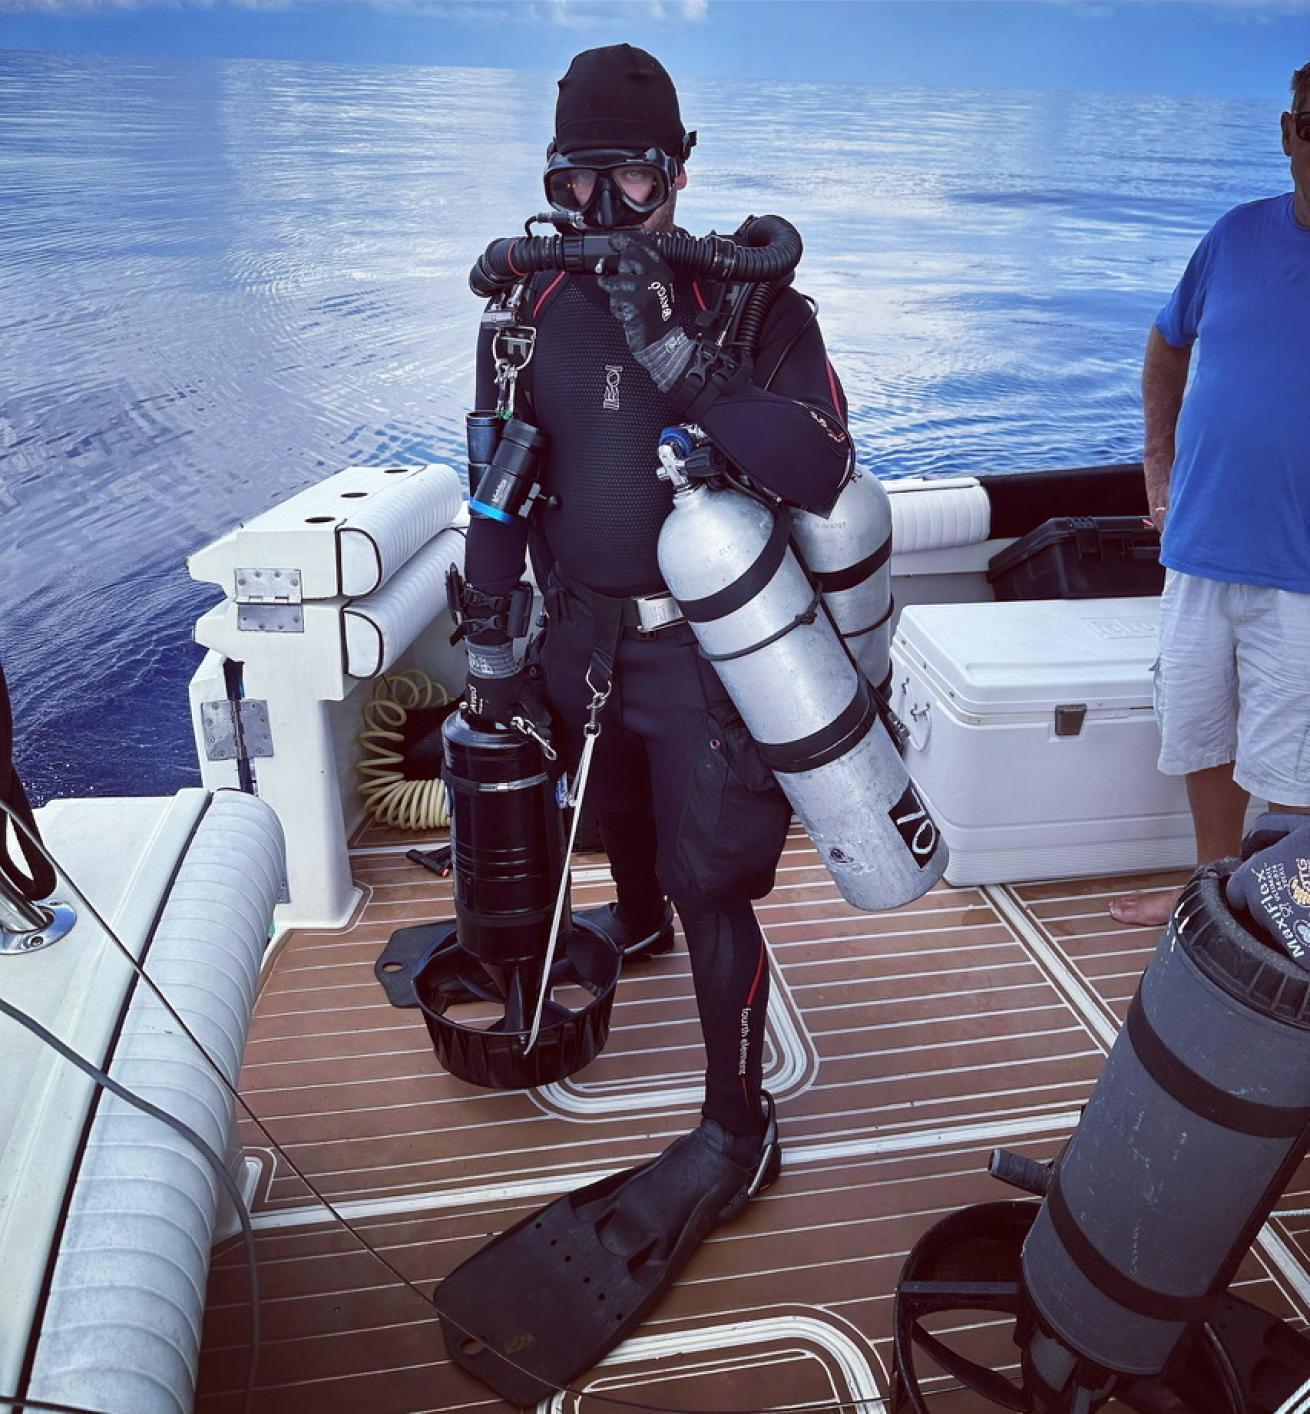 Jimmy Gadomski dropping in for a shipwreck survey of a depth of 210 feet offshore in the Gulf of Mexico. This type of diving takes special equipment and years of training.